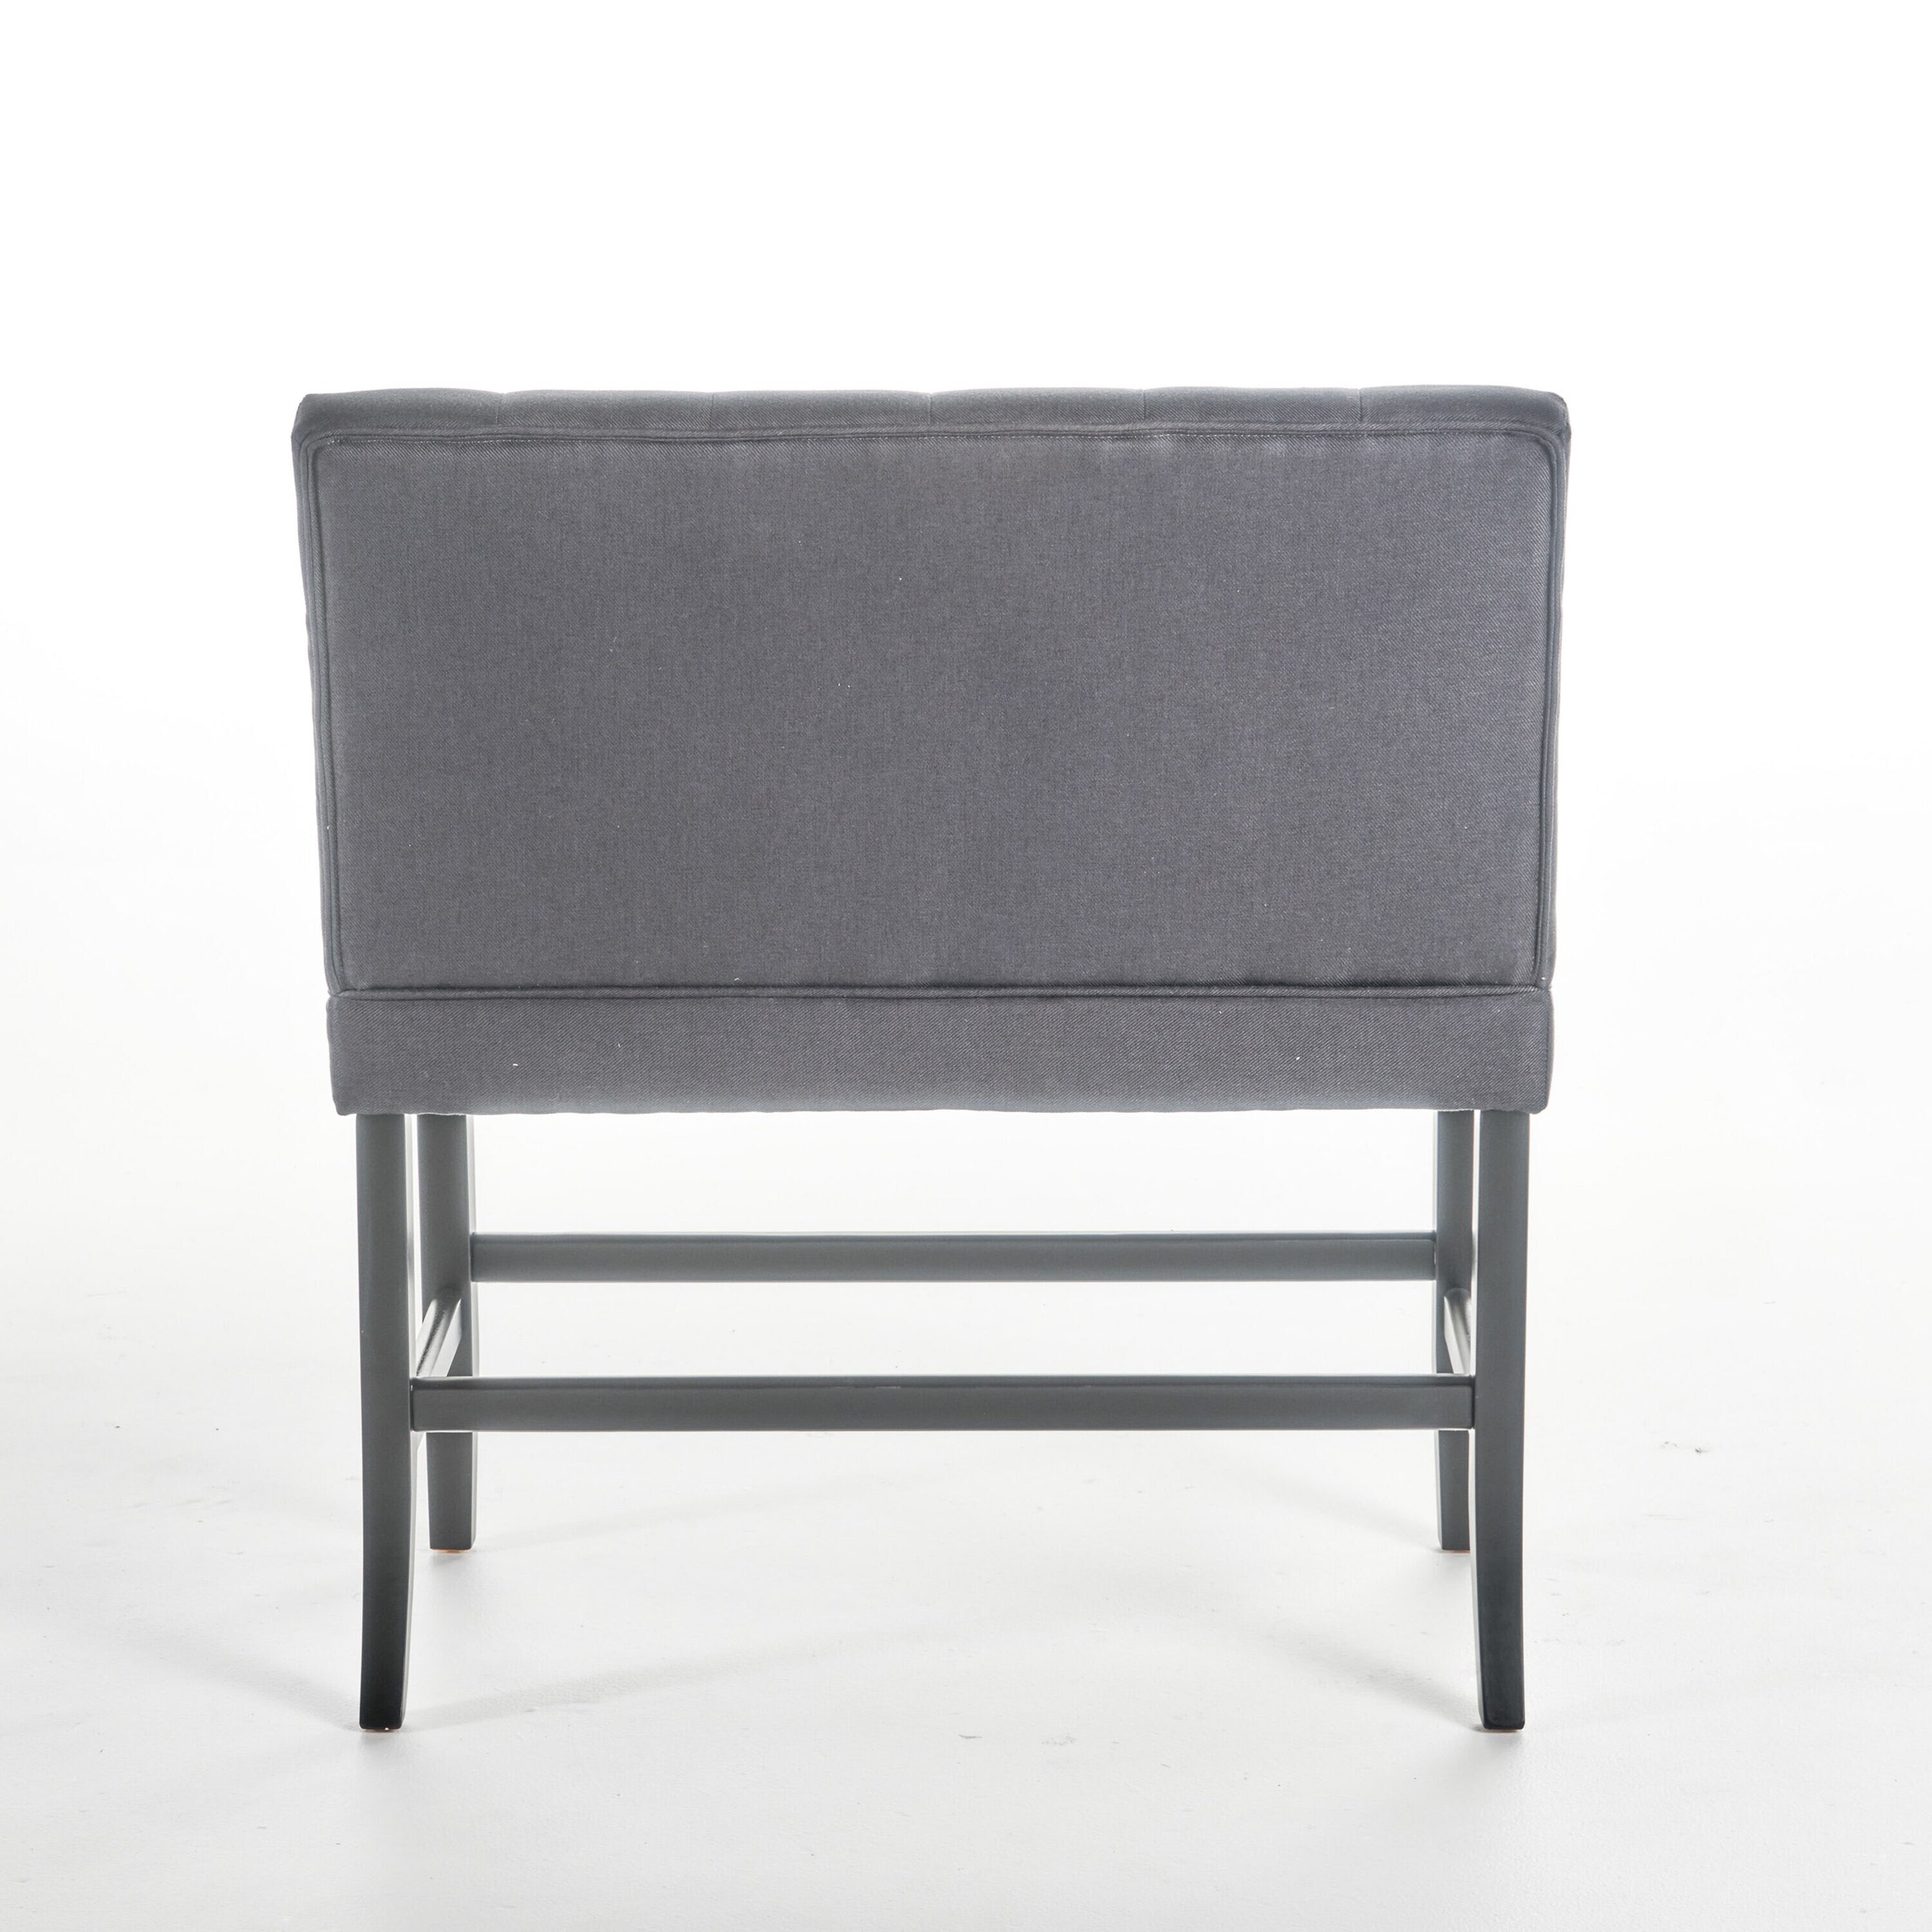 Paddy Tufted Back Fabric 26-inch Barstool Bench - Dark Charcoal